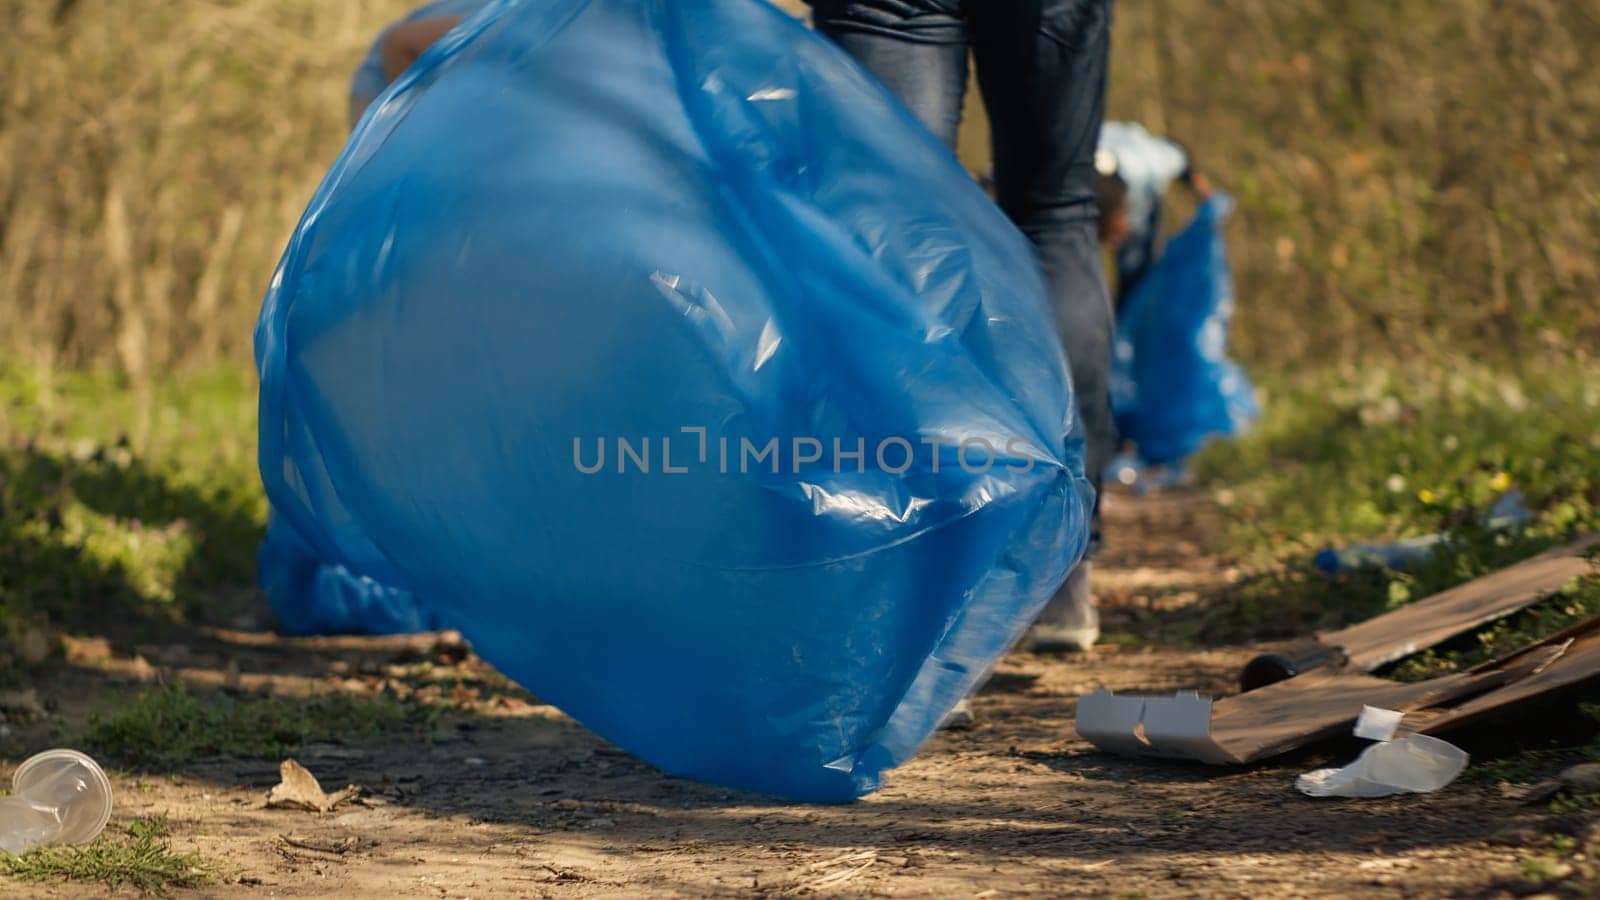 Diverse activists cleaning up rubbish in a garbage disposal bag by DCStudio